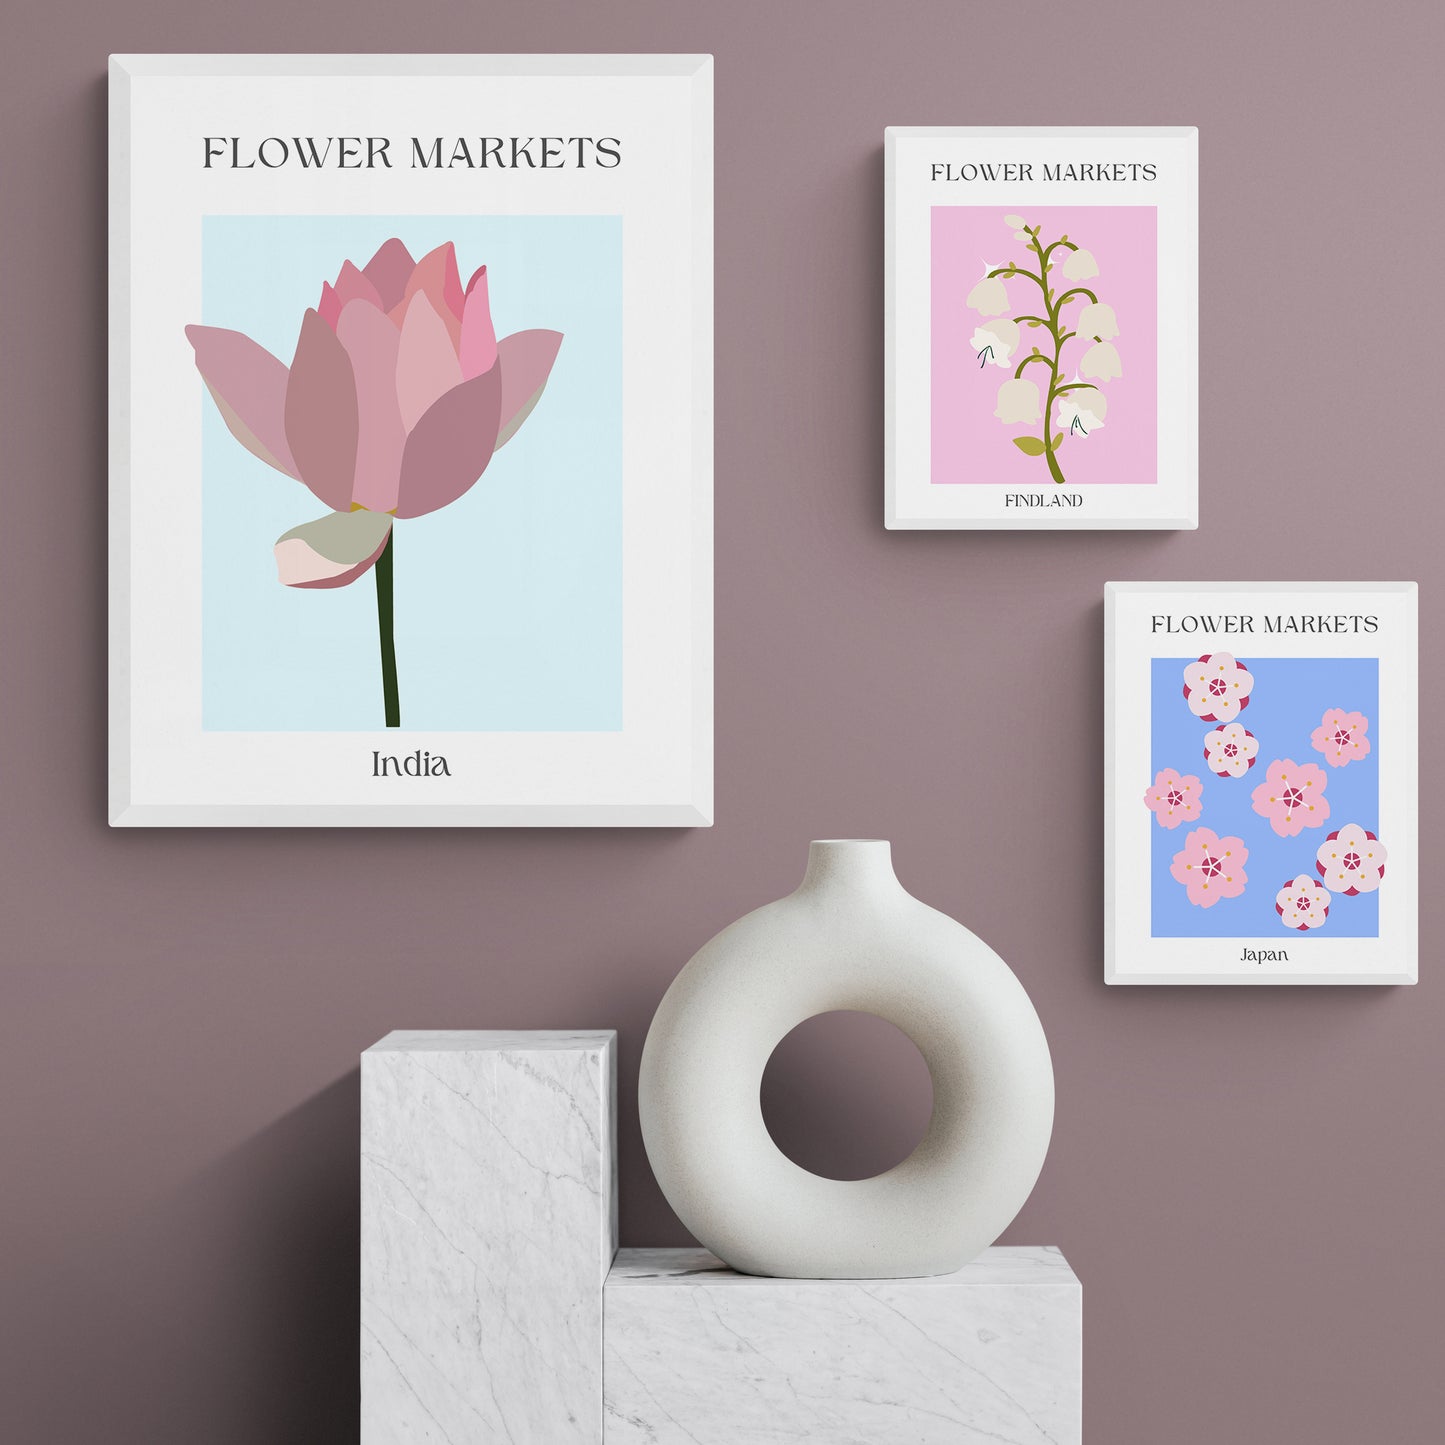 This Brazil Flowers Market Print is a stylish and contemporary wall art poster for any kitchen, living room, or bedroom. Featuring a vibrant and calming nature scene, this large print is designed to brighten up any home with its detailed imagery and high quality materials. A perfect combination of style and artistry!